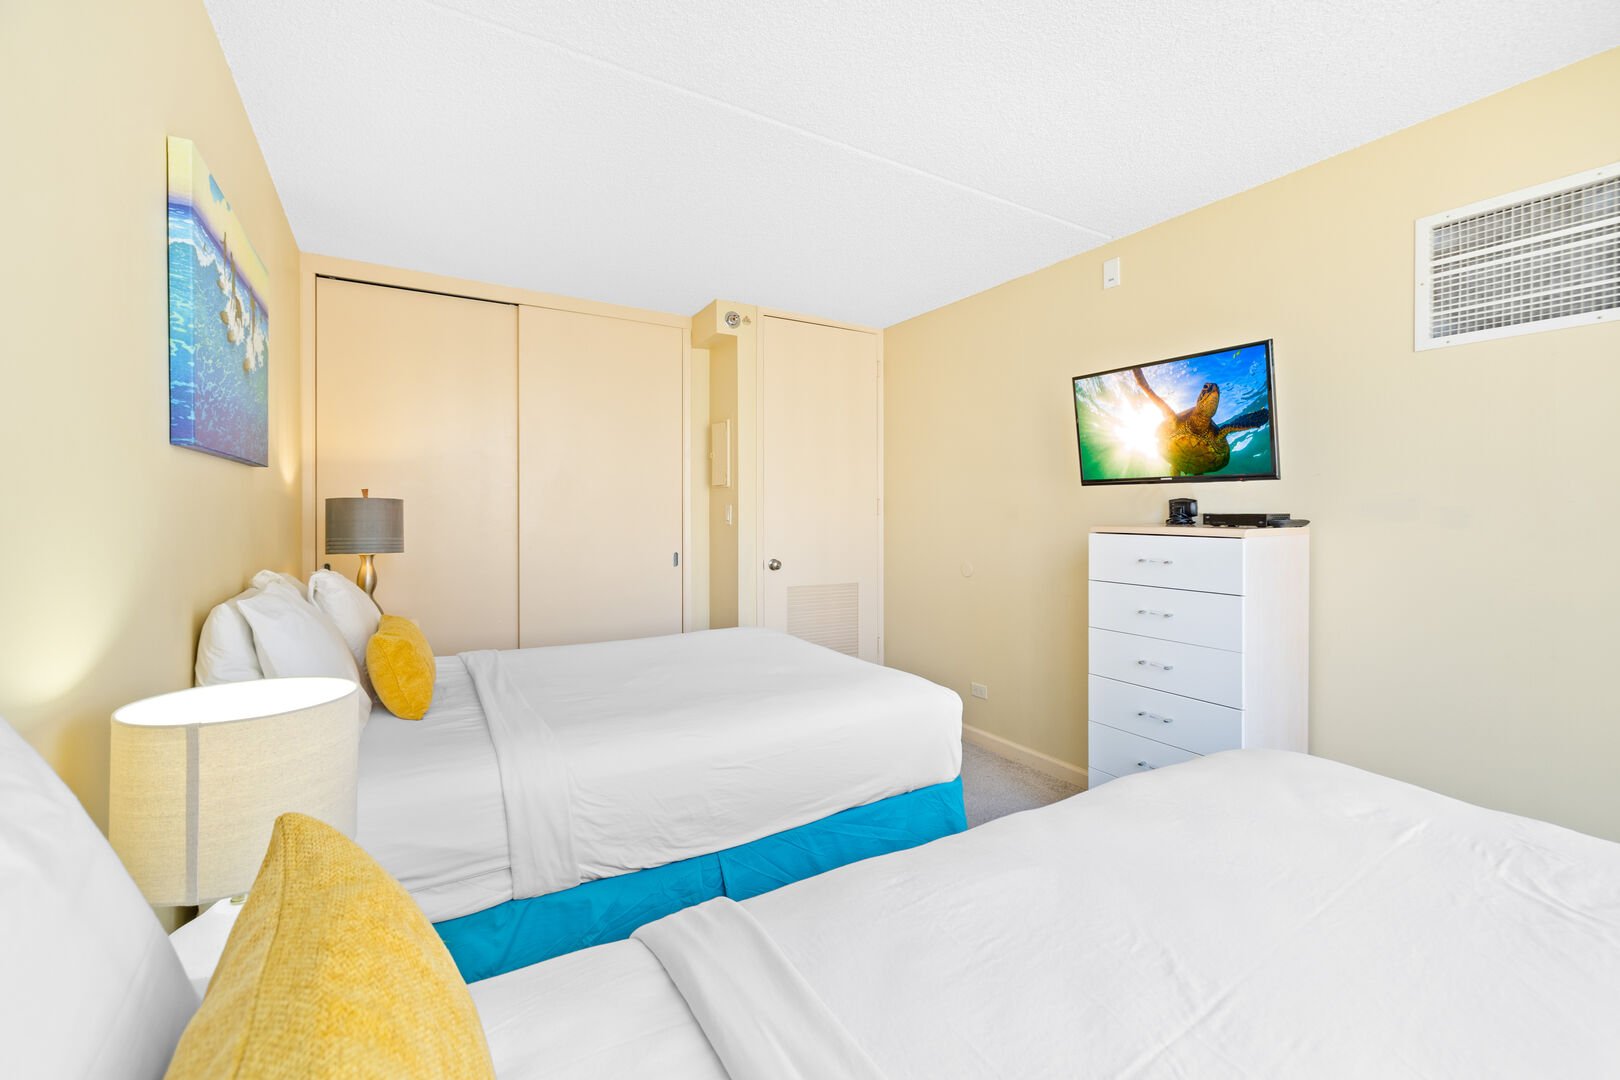 The bedroom has a flat screen TV perfect for your entertainment!